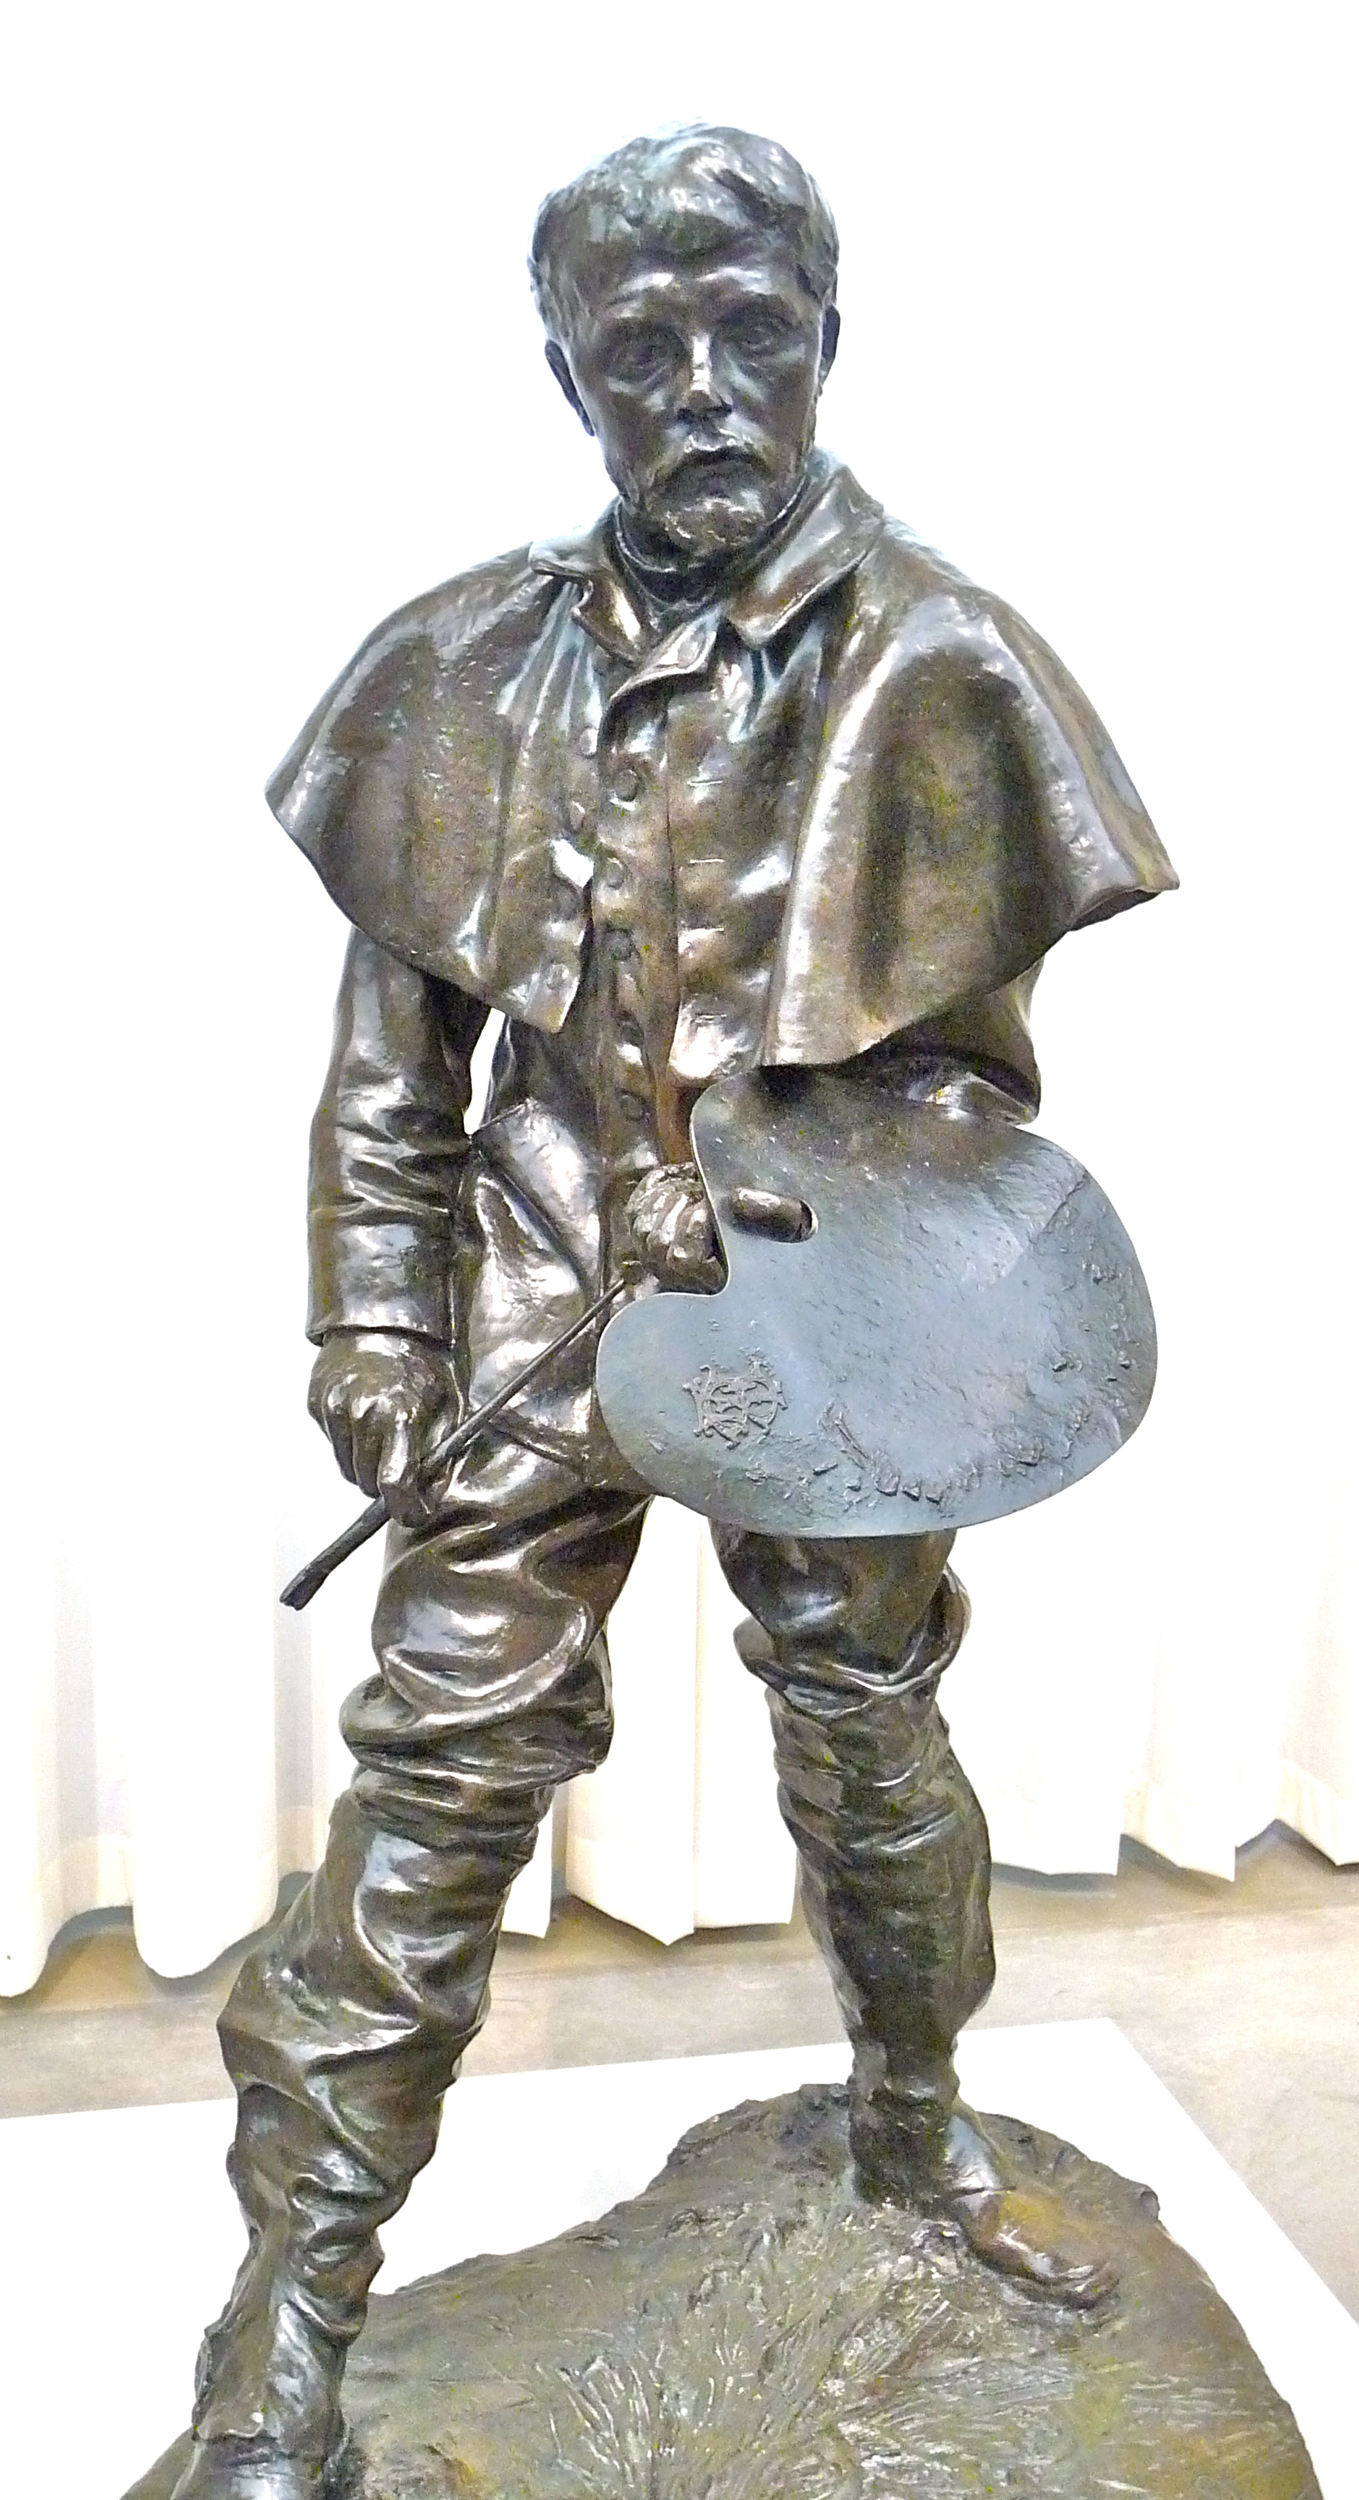 the bronze statue is depicting a man carrying a shield